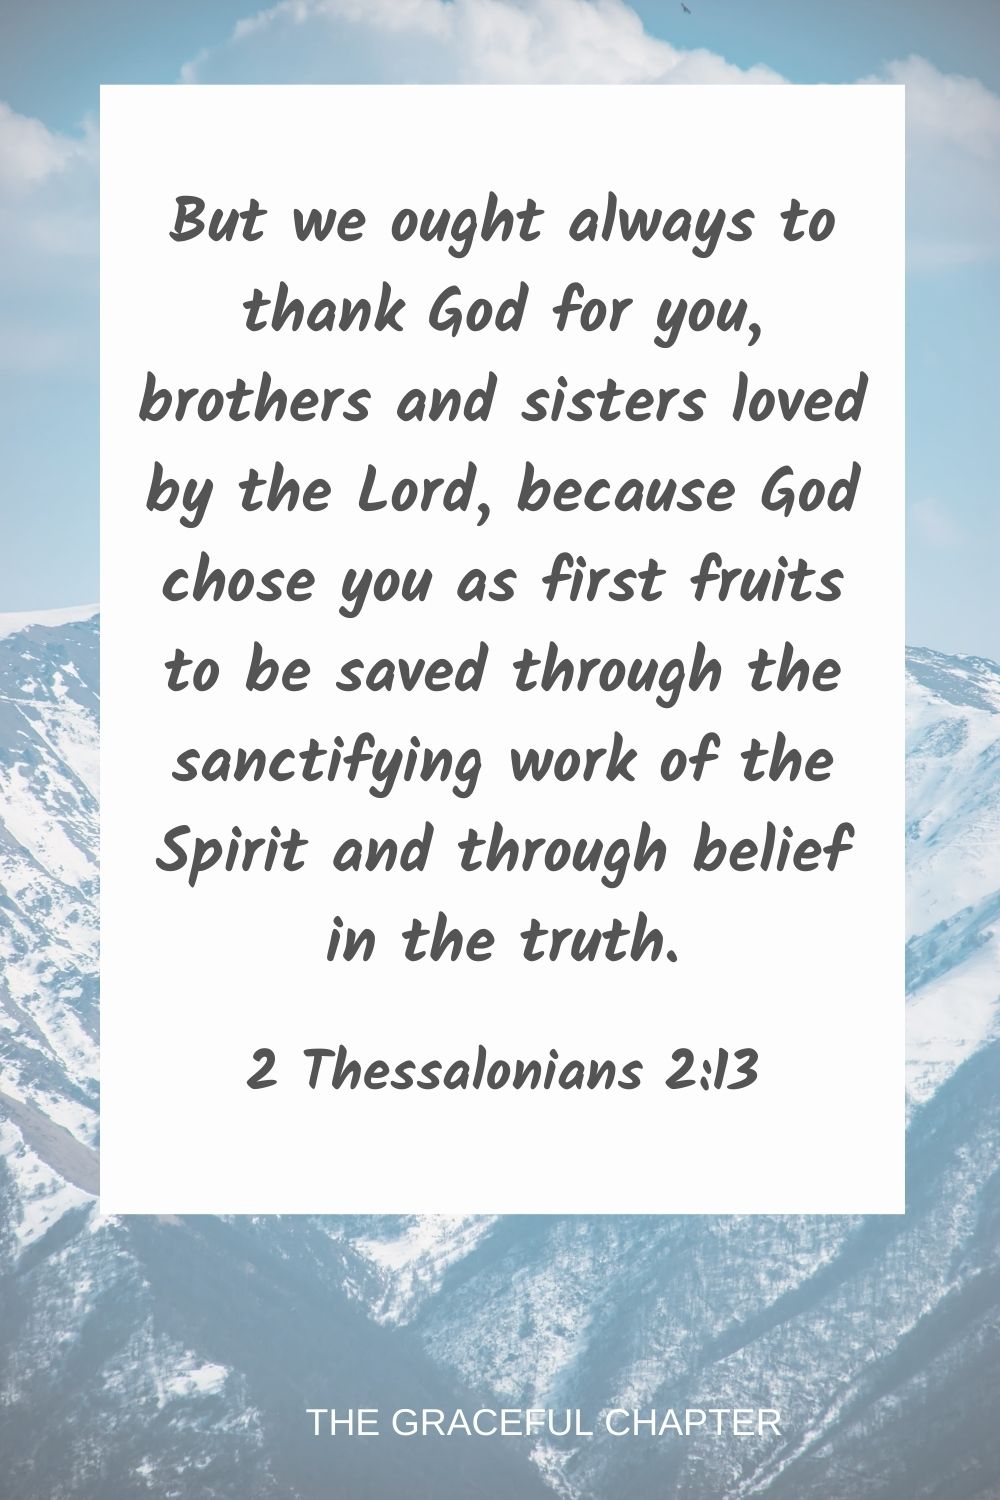 But we ought always to thank God for you, brothers and sisters loved by the Lord, because God chose you as first fruits to be saved through the sanctifying work of the Spirit and through belief in the truth. 2 Thessalonians 2:13